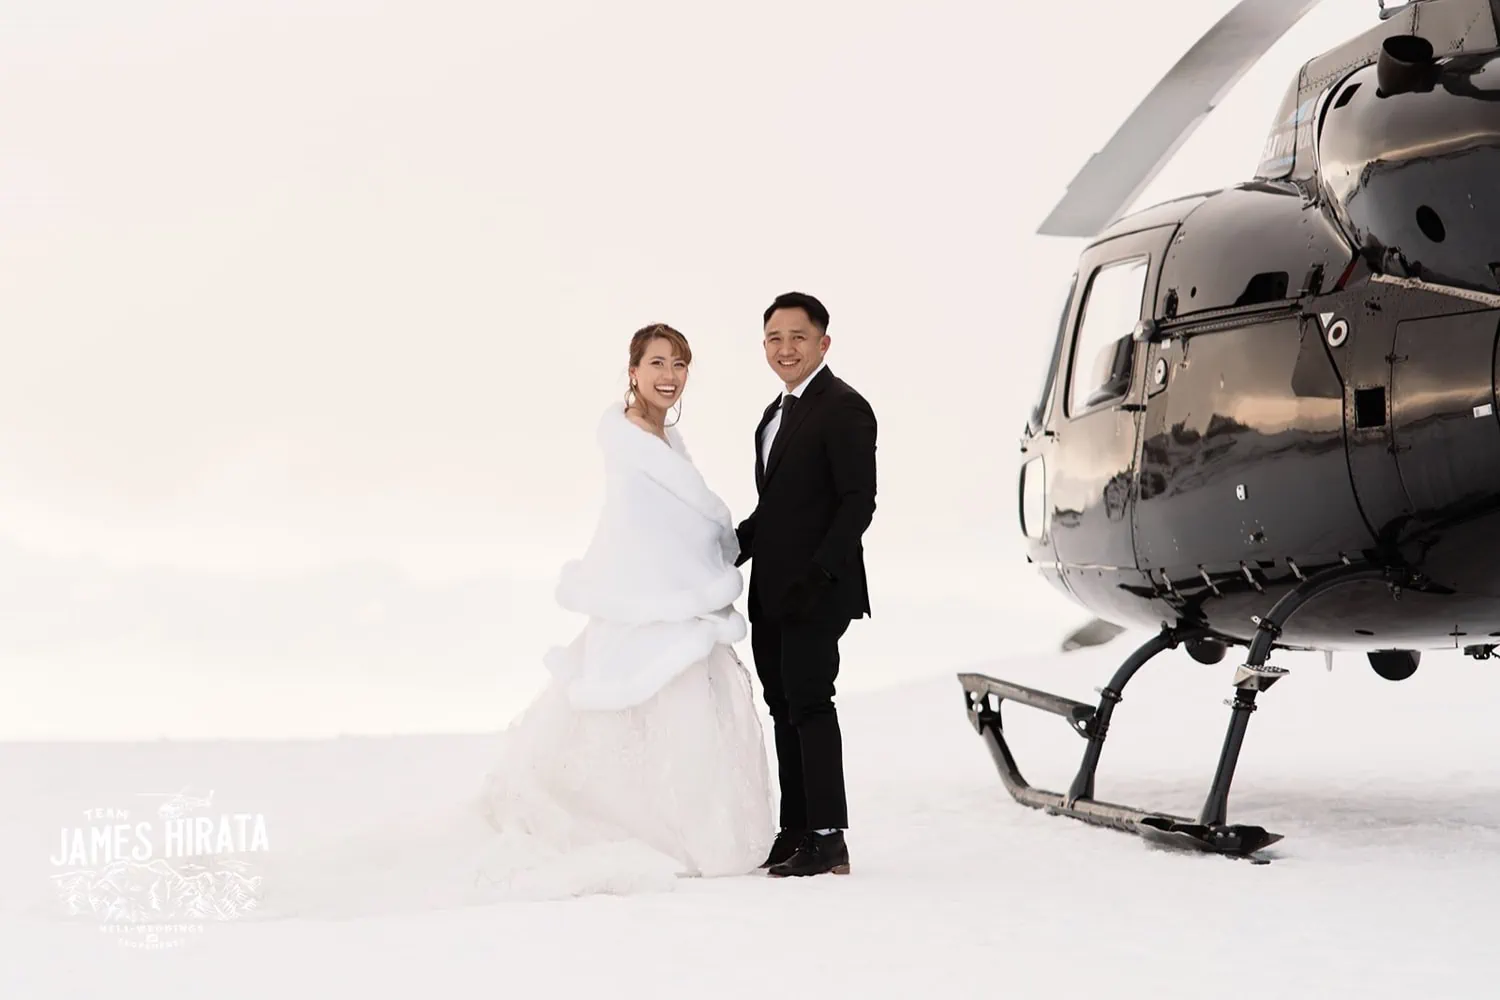 Joan & Brandon capture a memorable moment during their Queenstown Heli Elopement, standing in front of a helicopter.